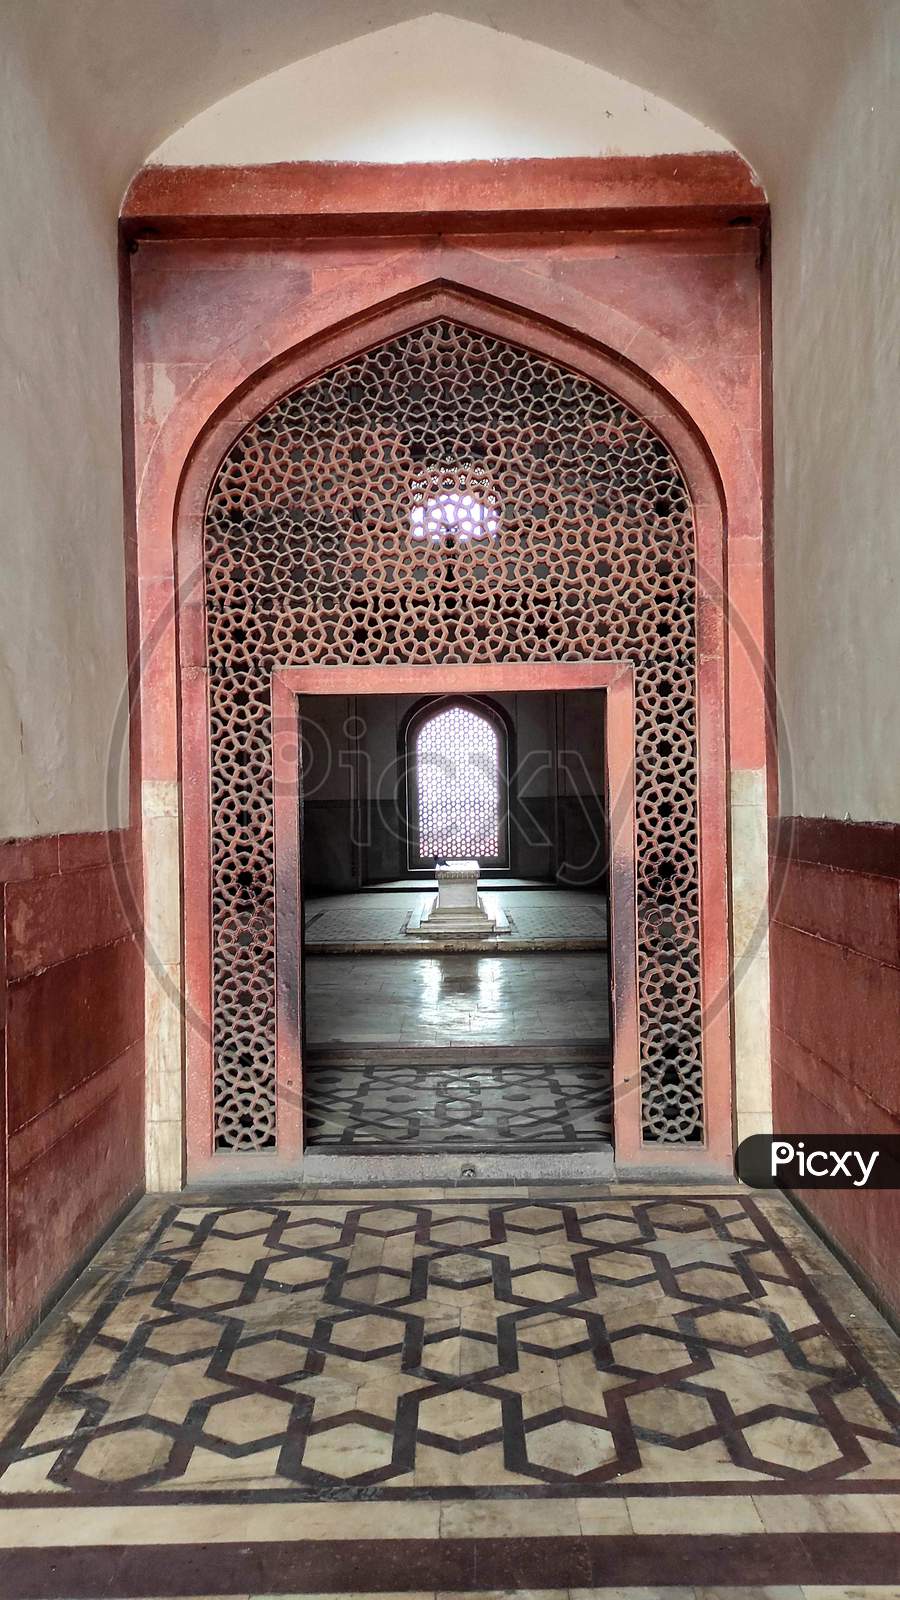 Tomb, Humayun Tomb, Persian architect, UNESCO World Heritage site, Mobile photography